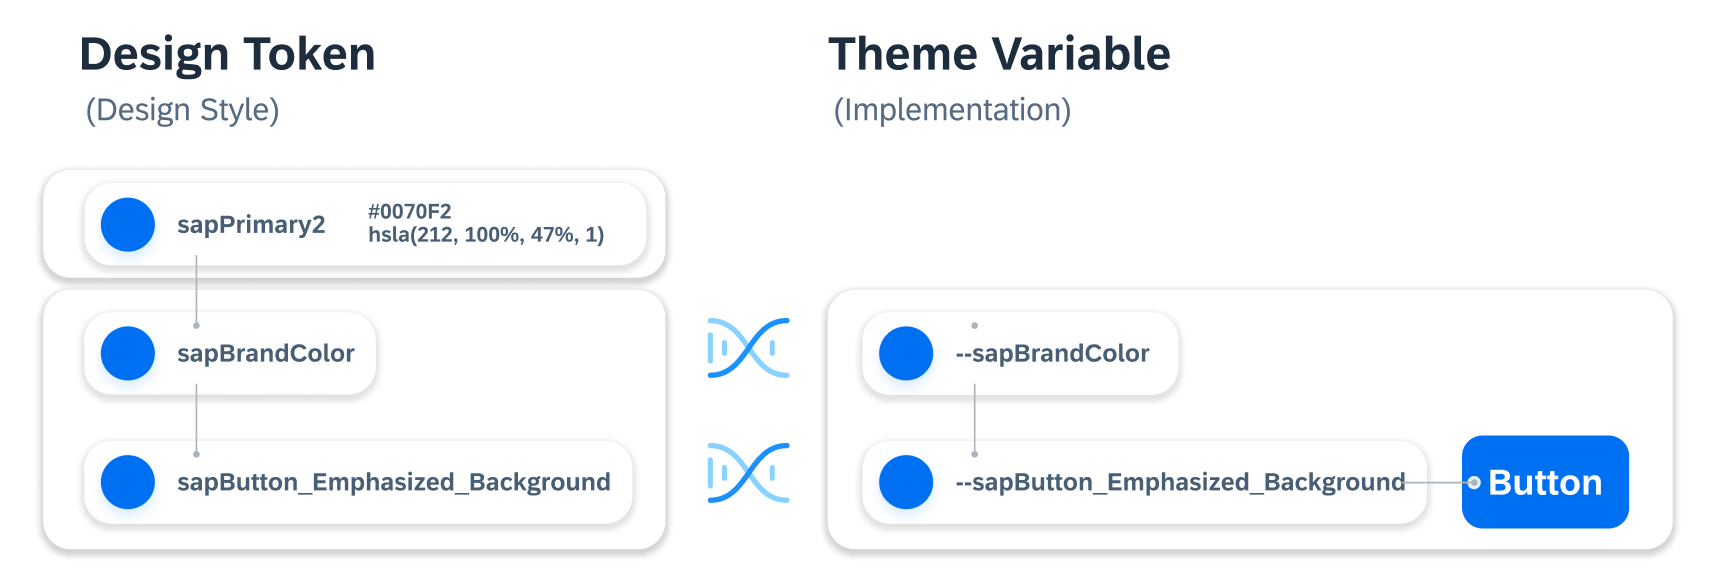 Design tokens are named the same as theming variables.